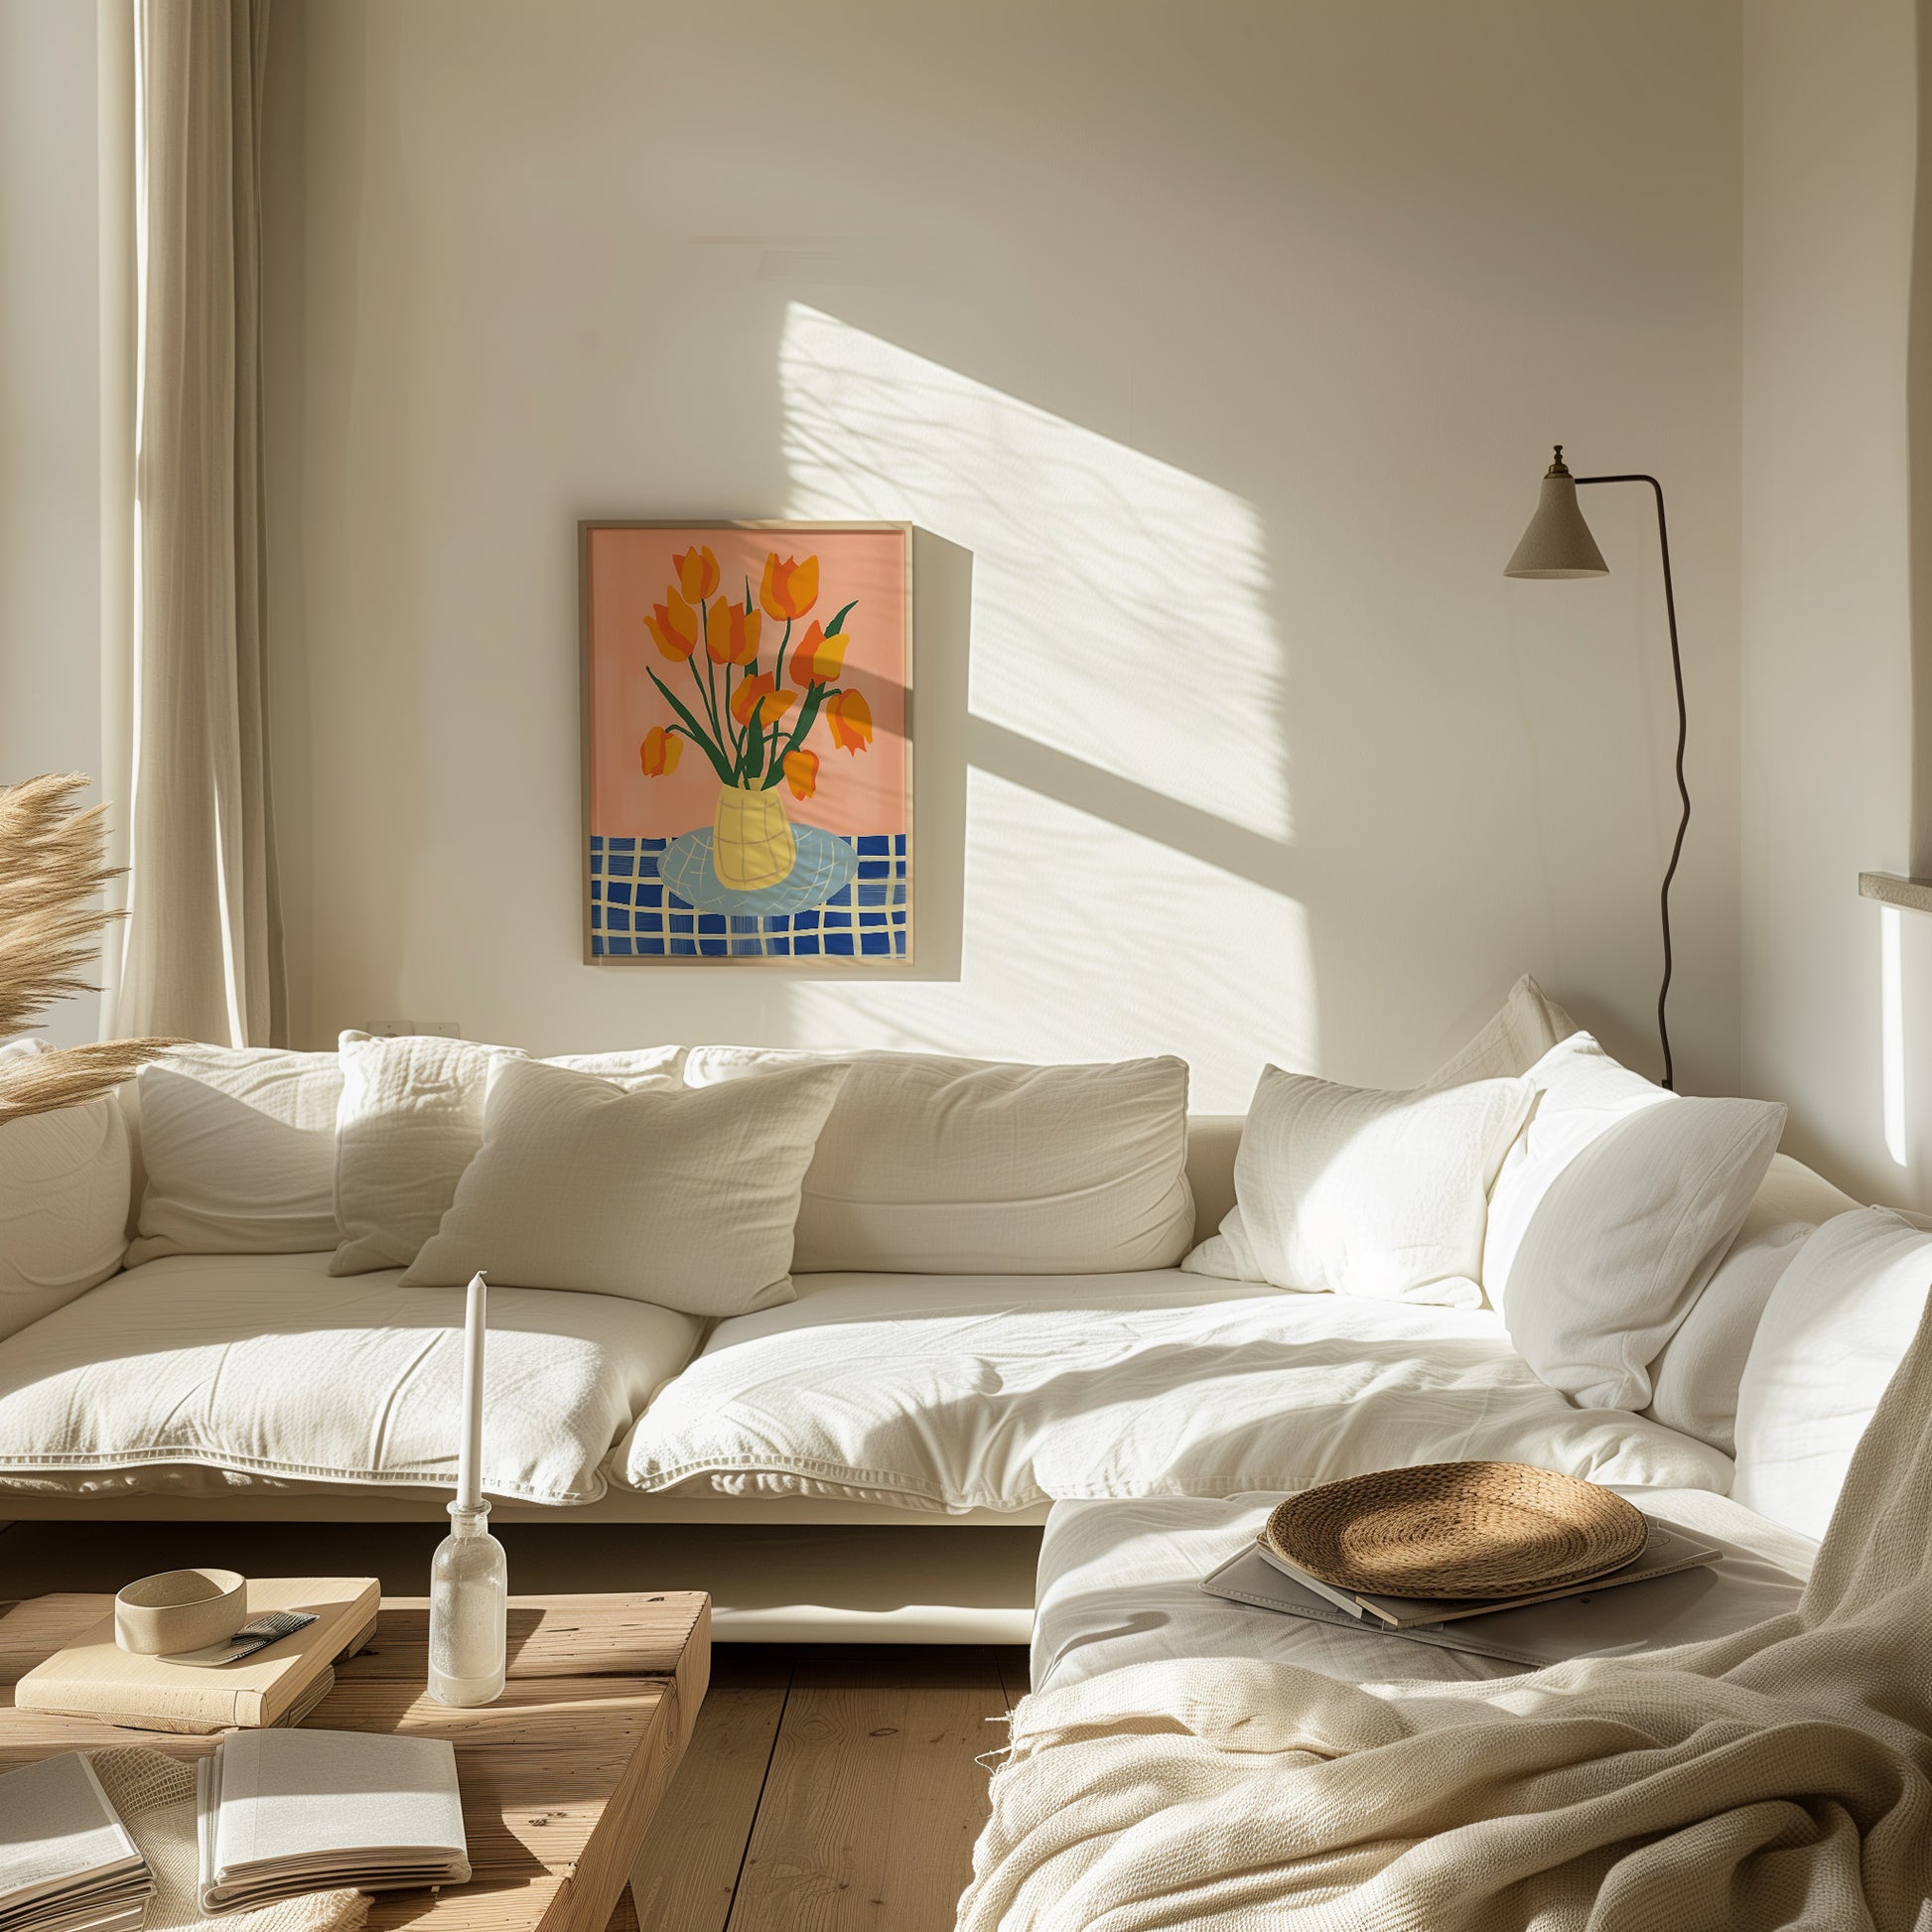 A cozy living room bathed in sunlight with a plush sofa, wall art, and warm accents.